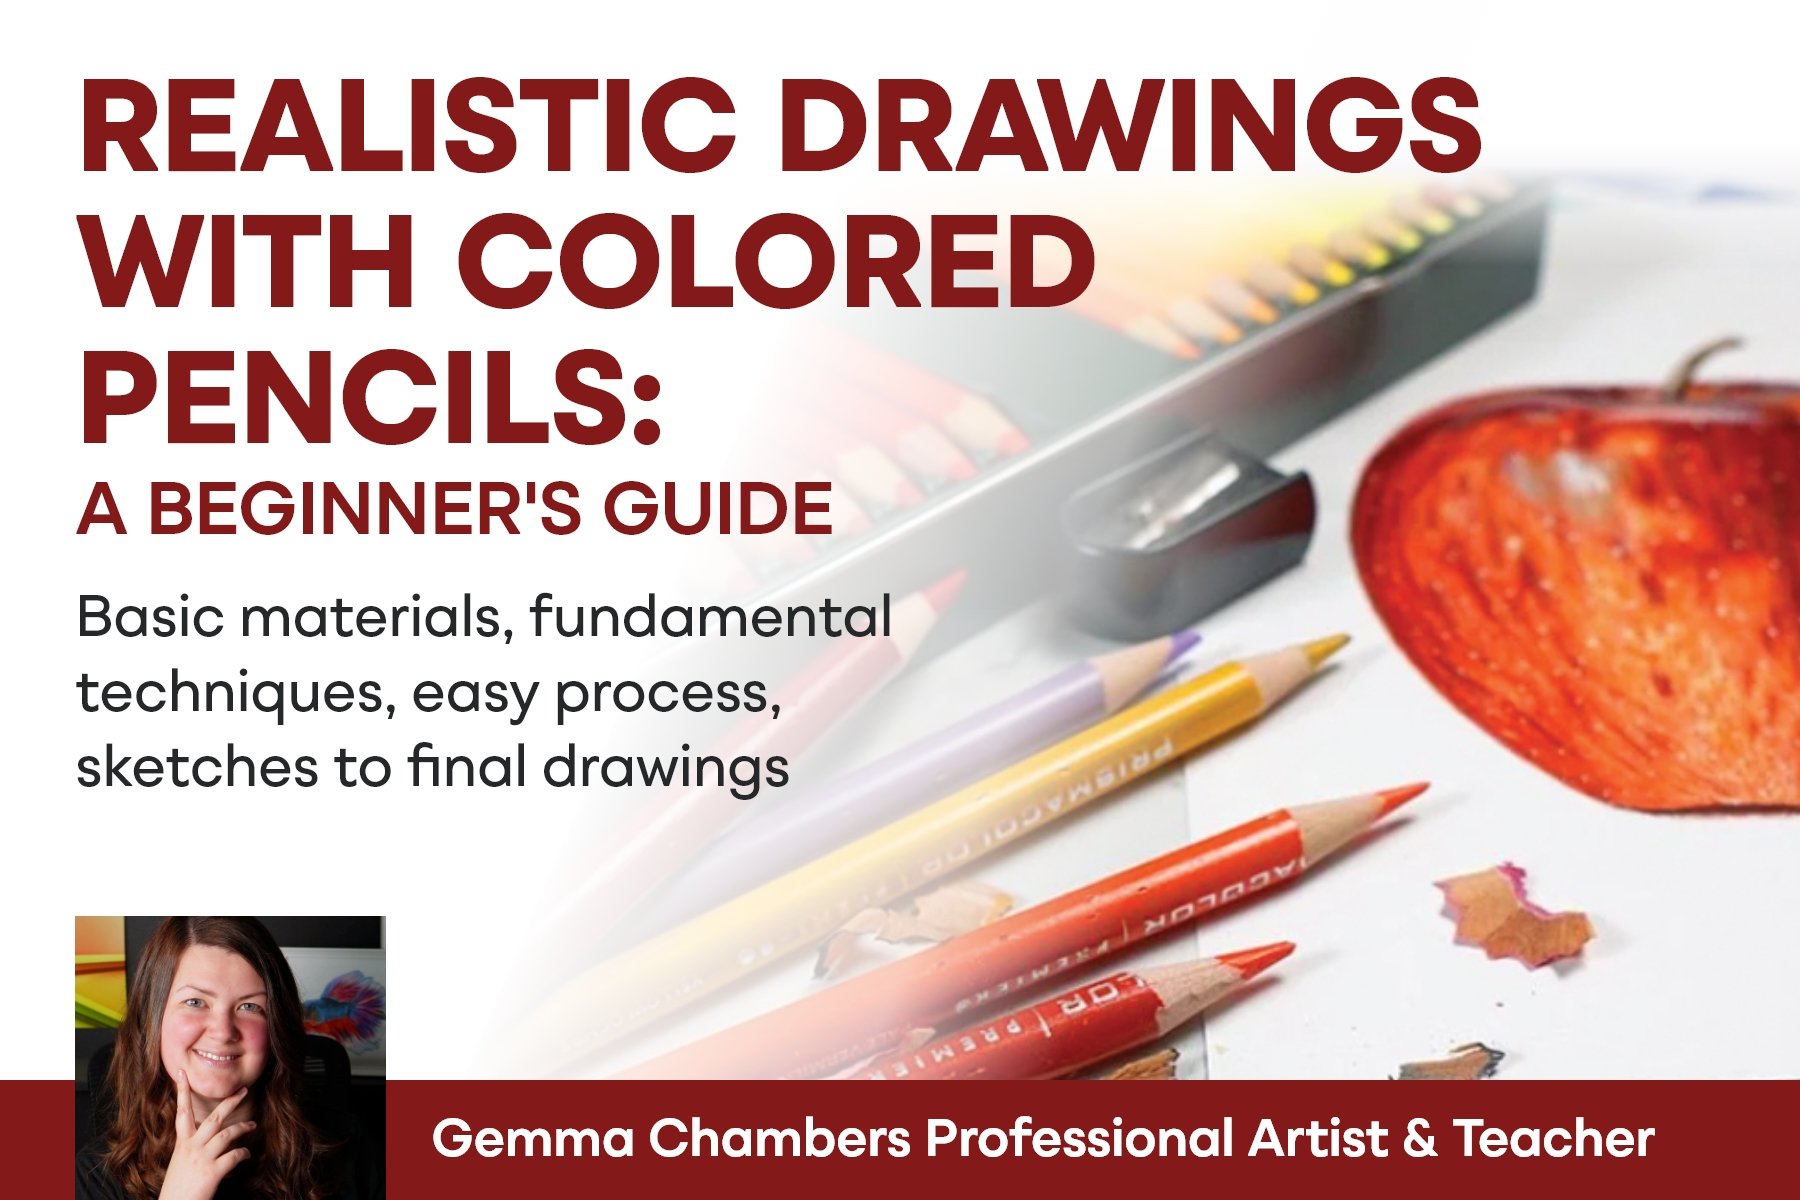 Best Sketchbook For Colored Pencils - Complete Guide - How To Artist